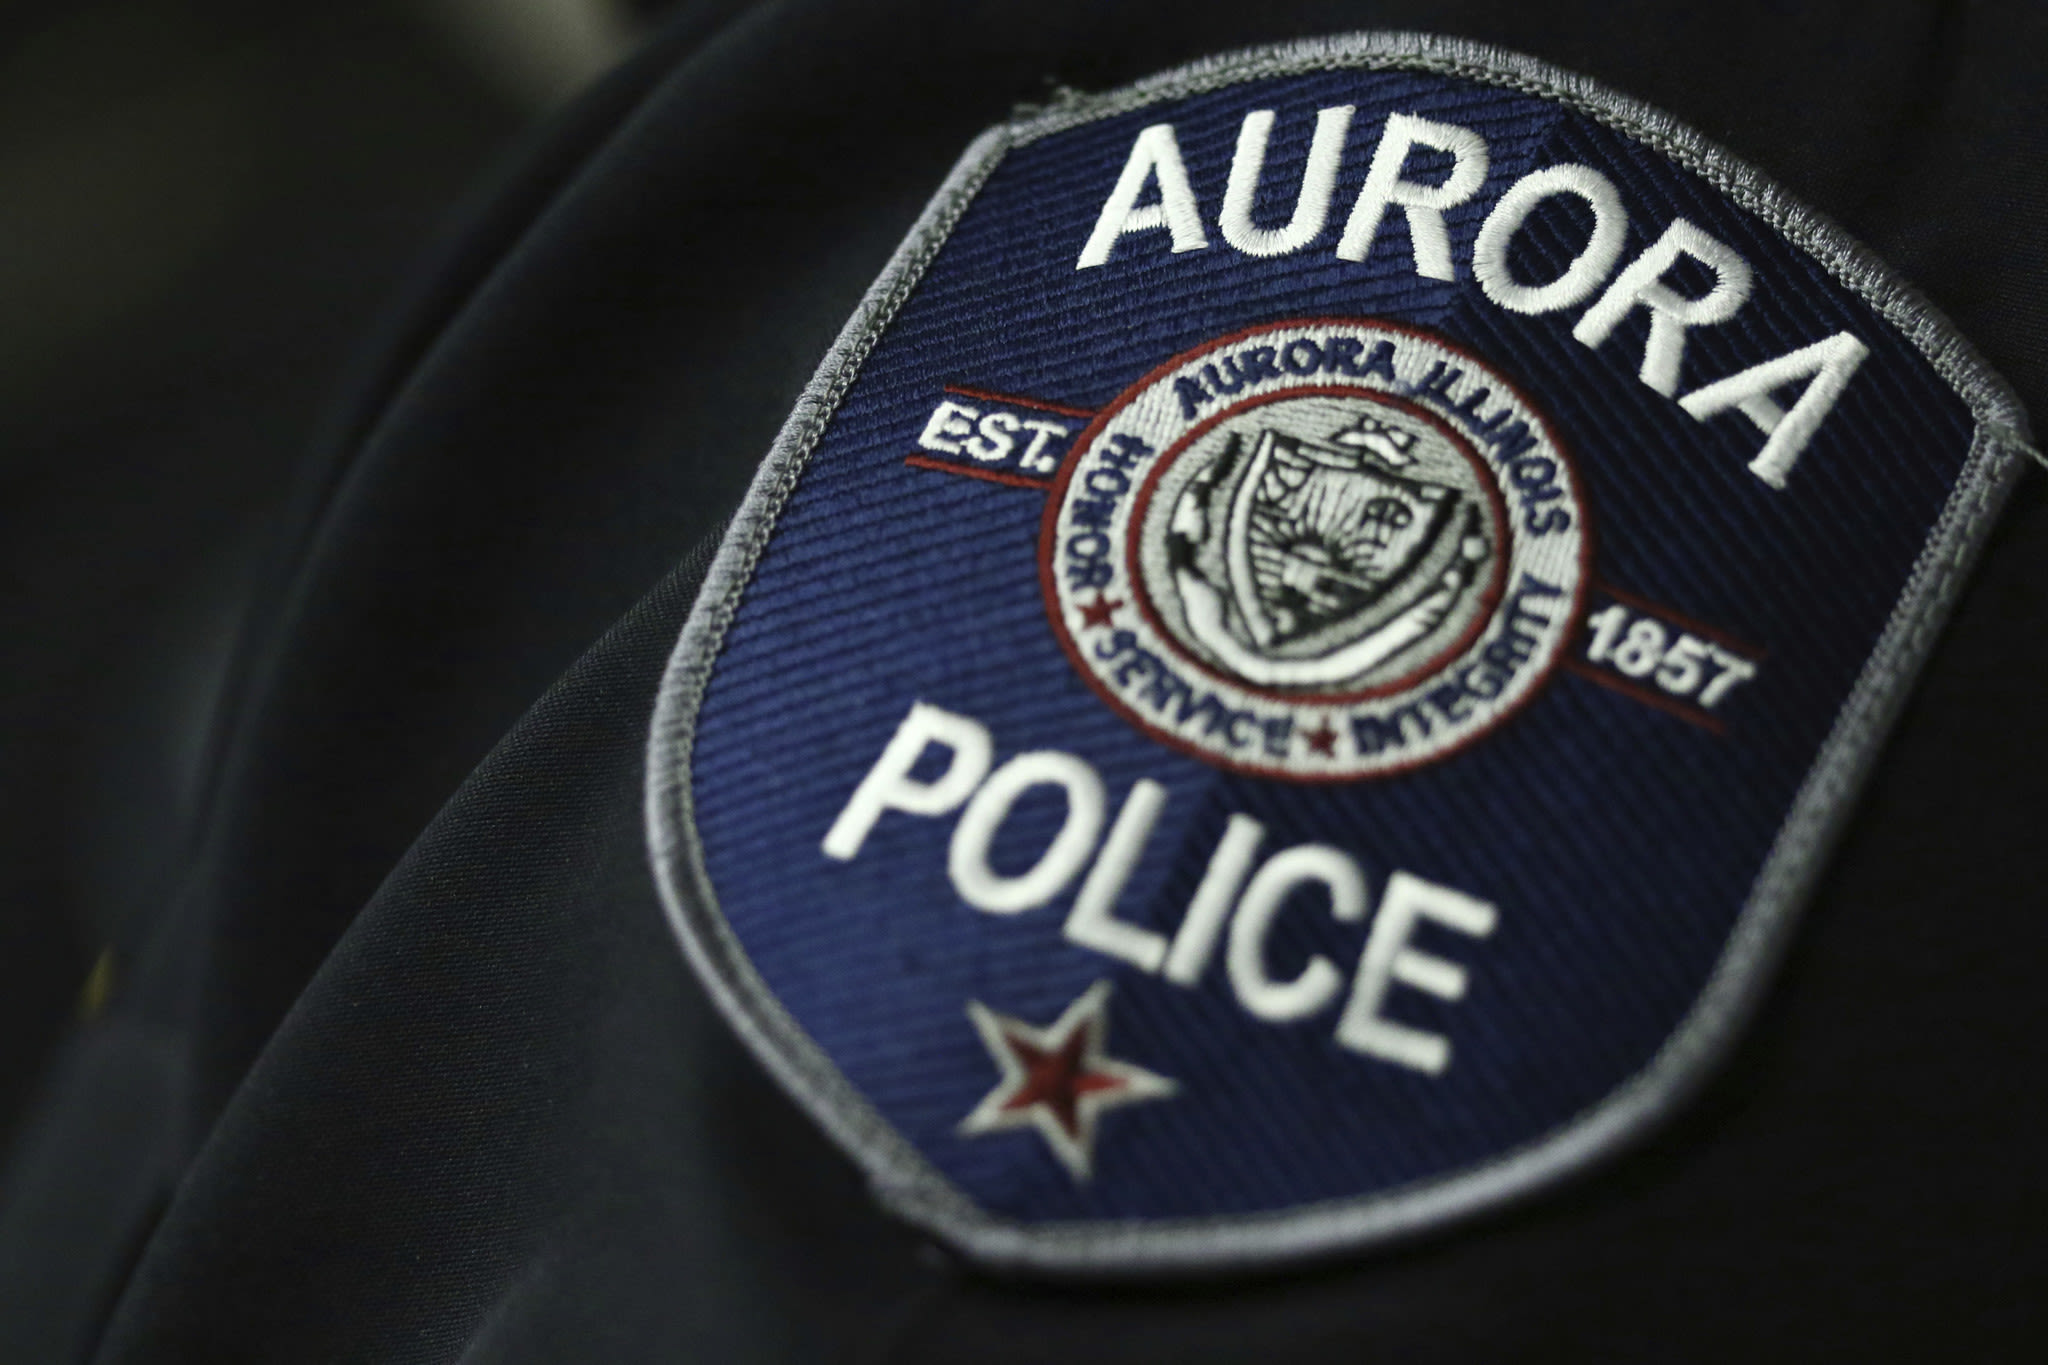 Aurora Police Department publicly releasing survey results